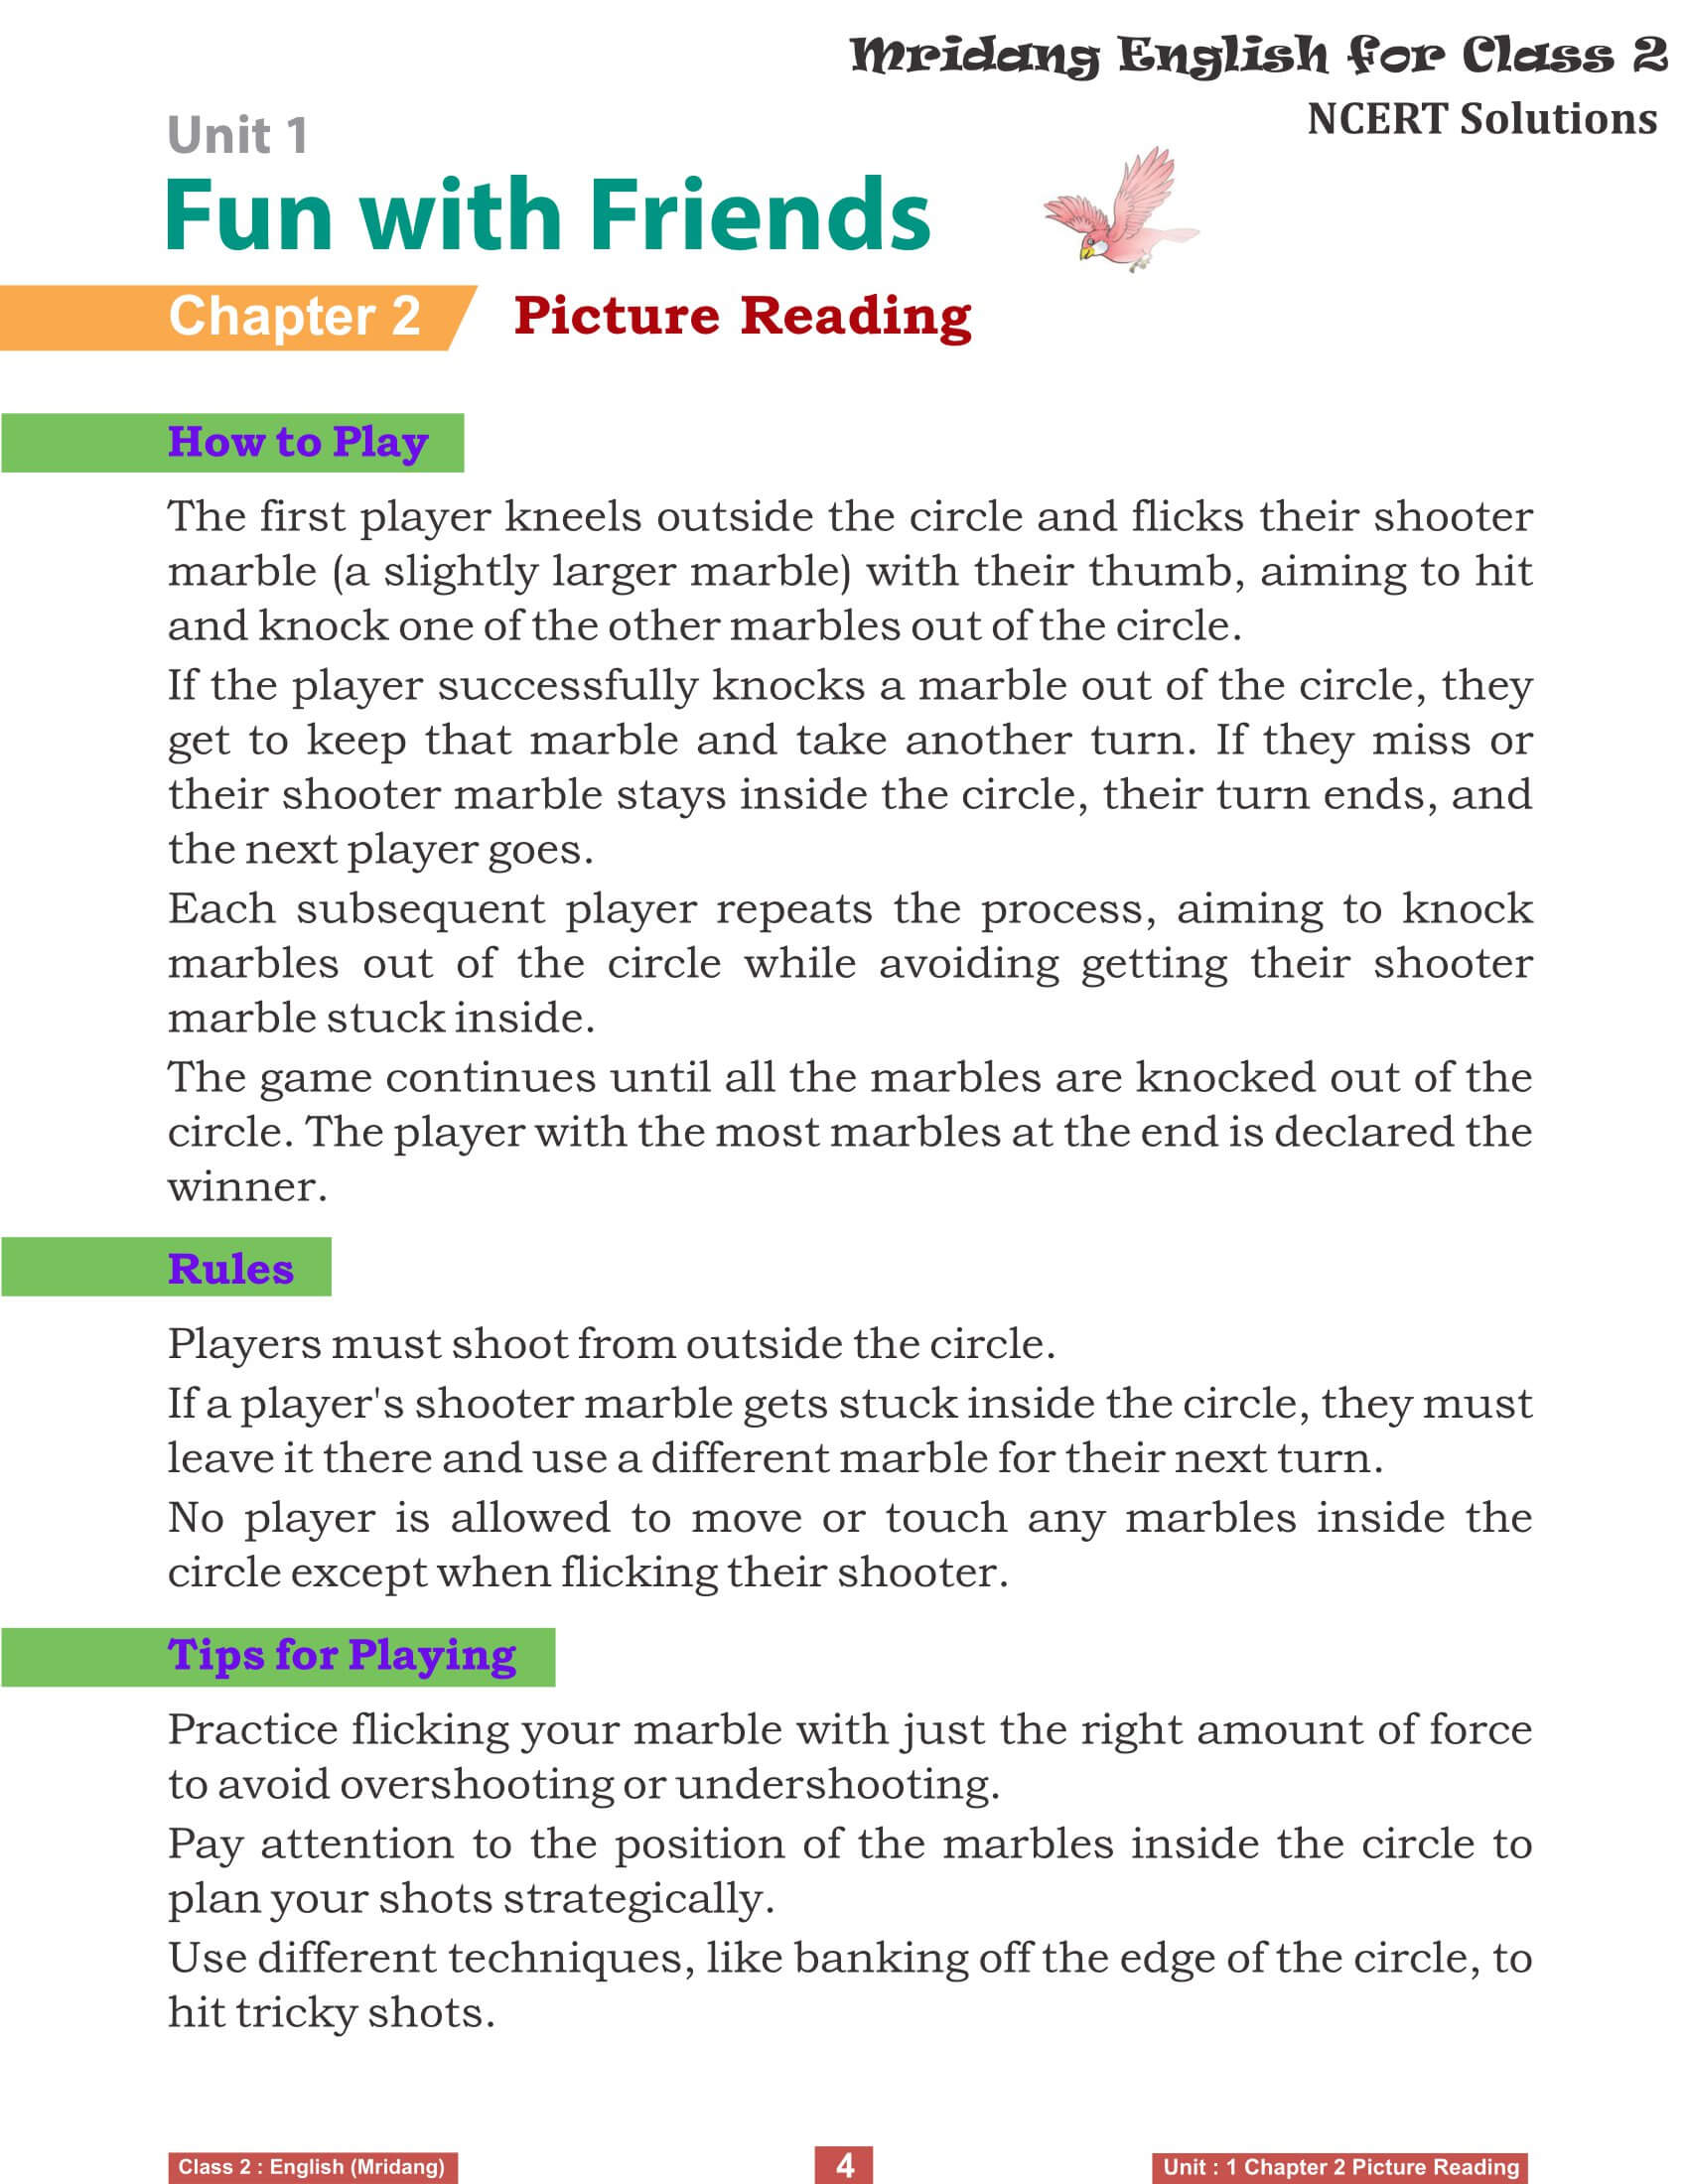 NCERT Solutions for Class 2 English Mridang Unit 1 Fun with Friends Chapter 2